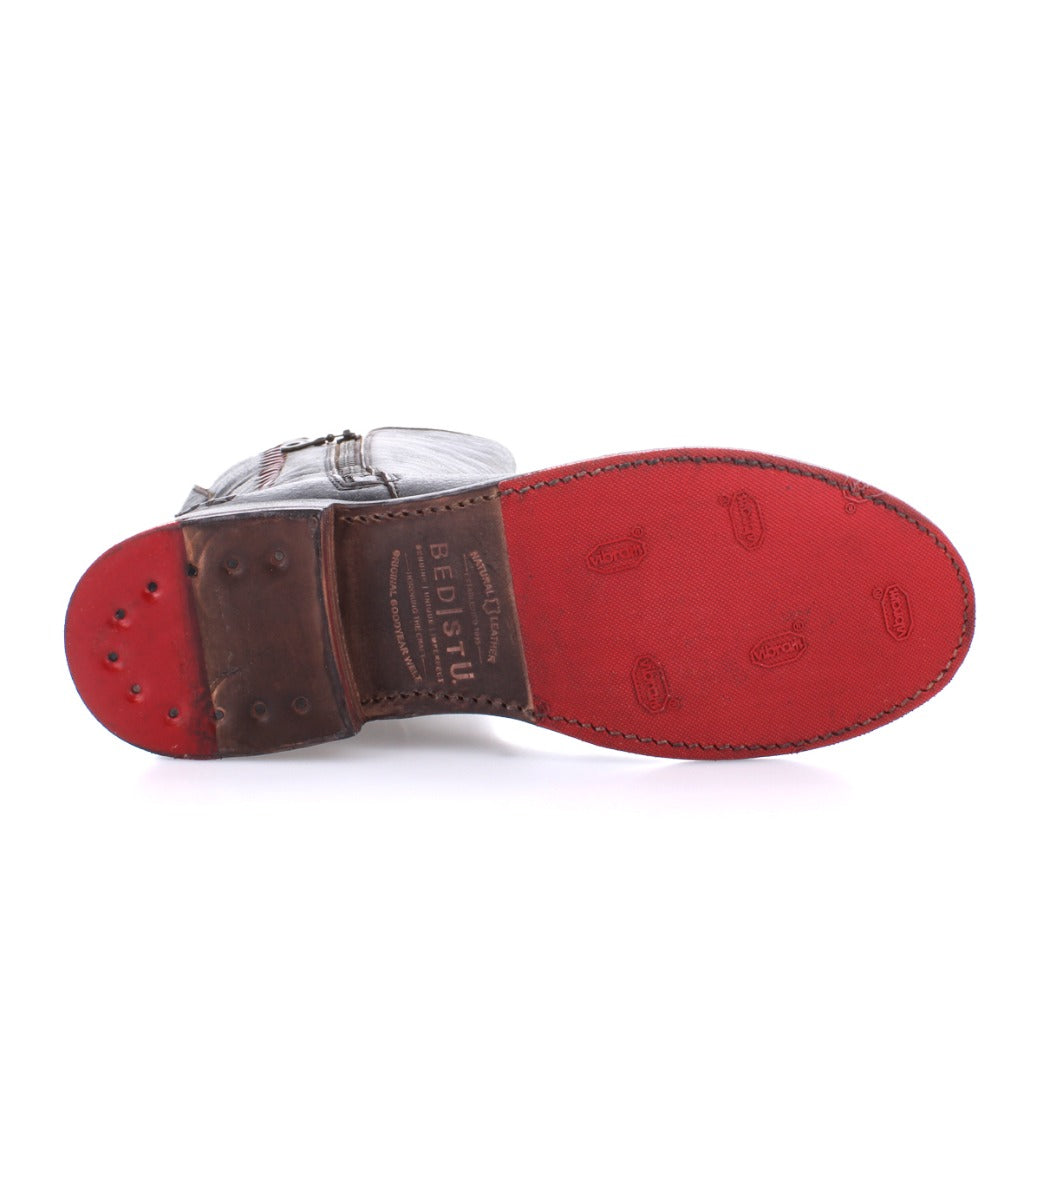 A pair of Latifah shoes by Bed Stu with a red sole and a silver buckle.